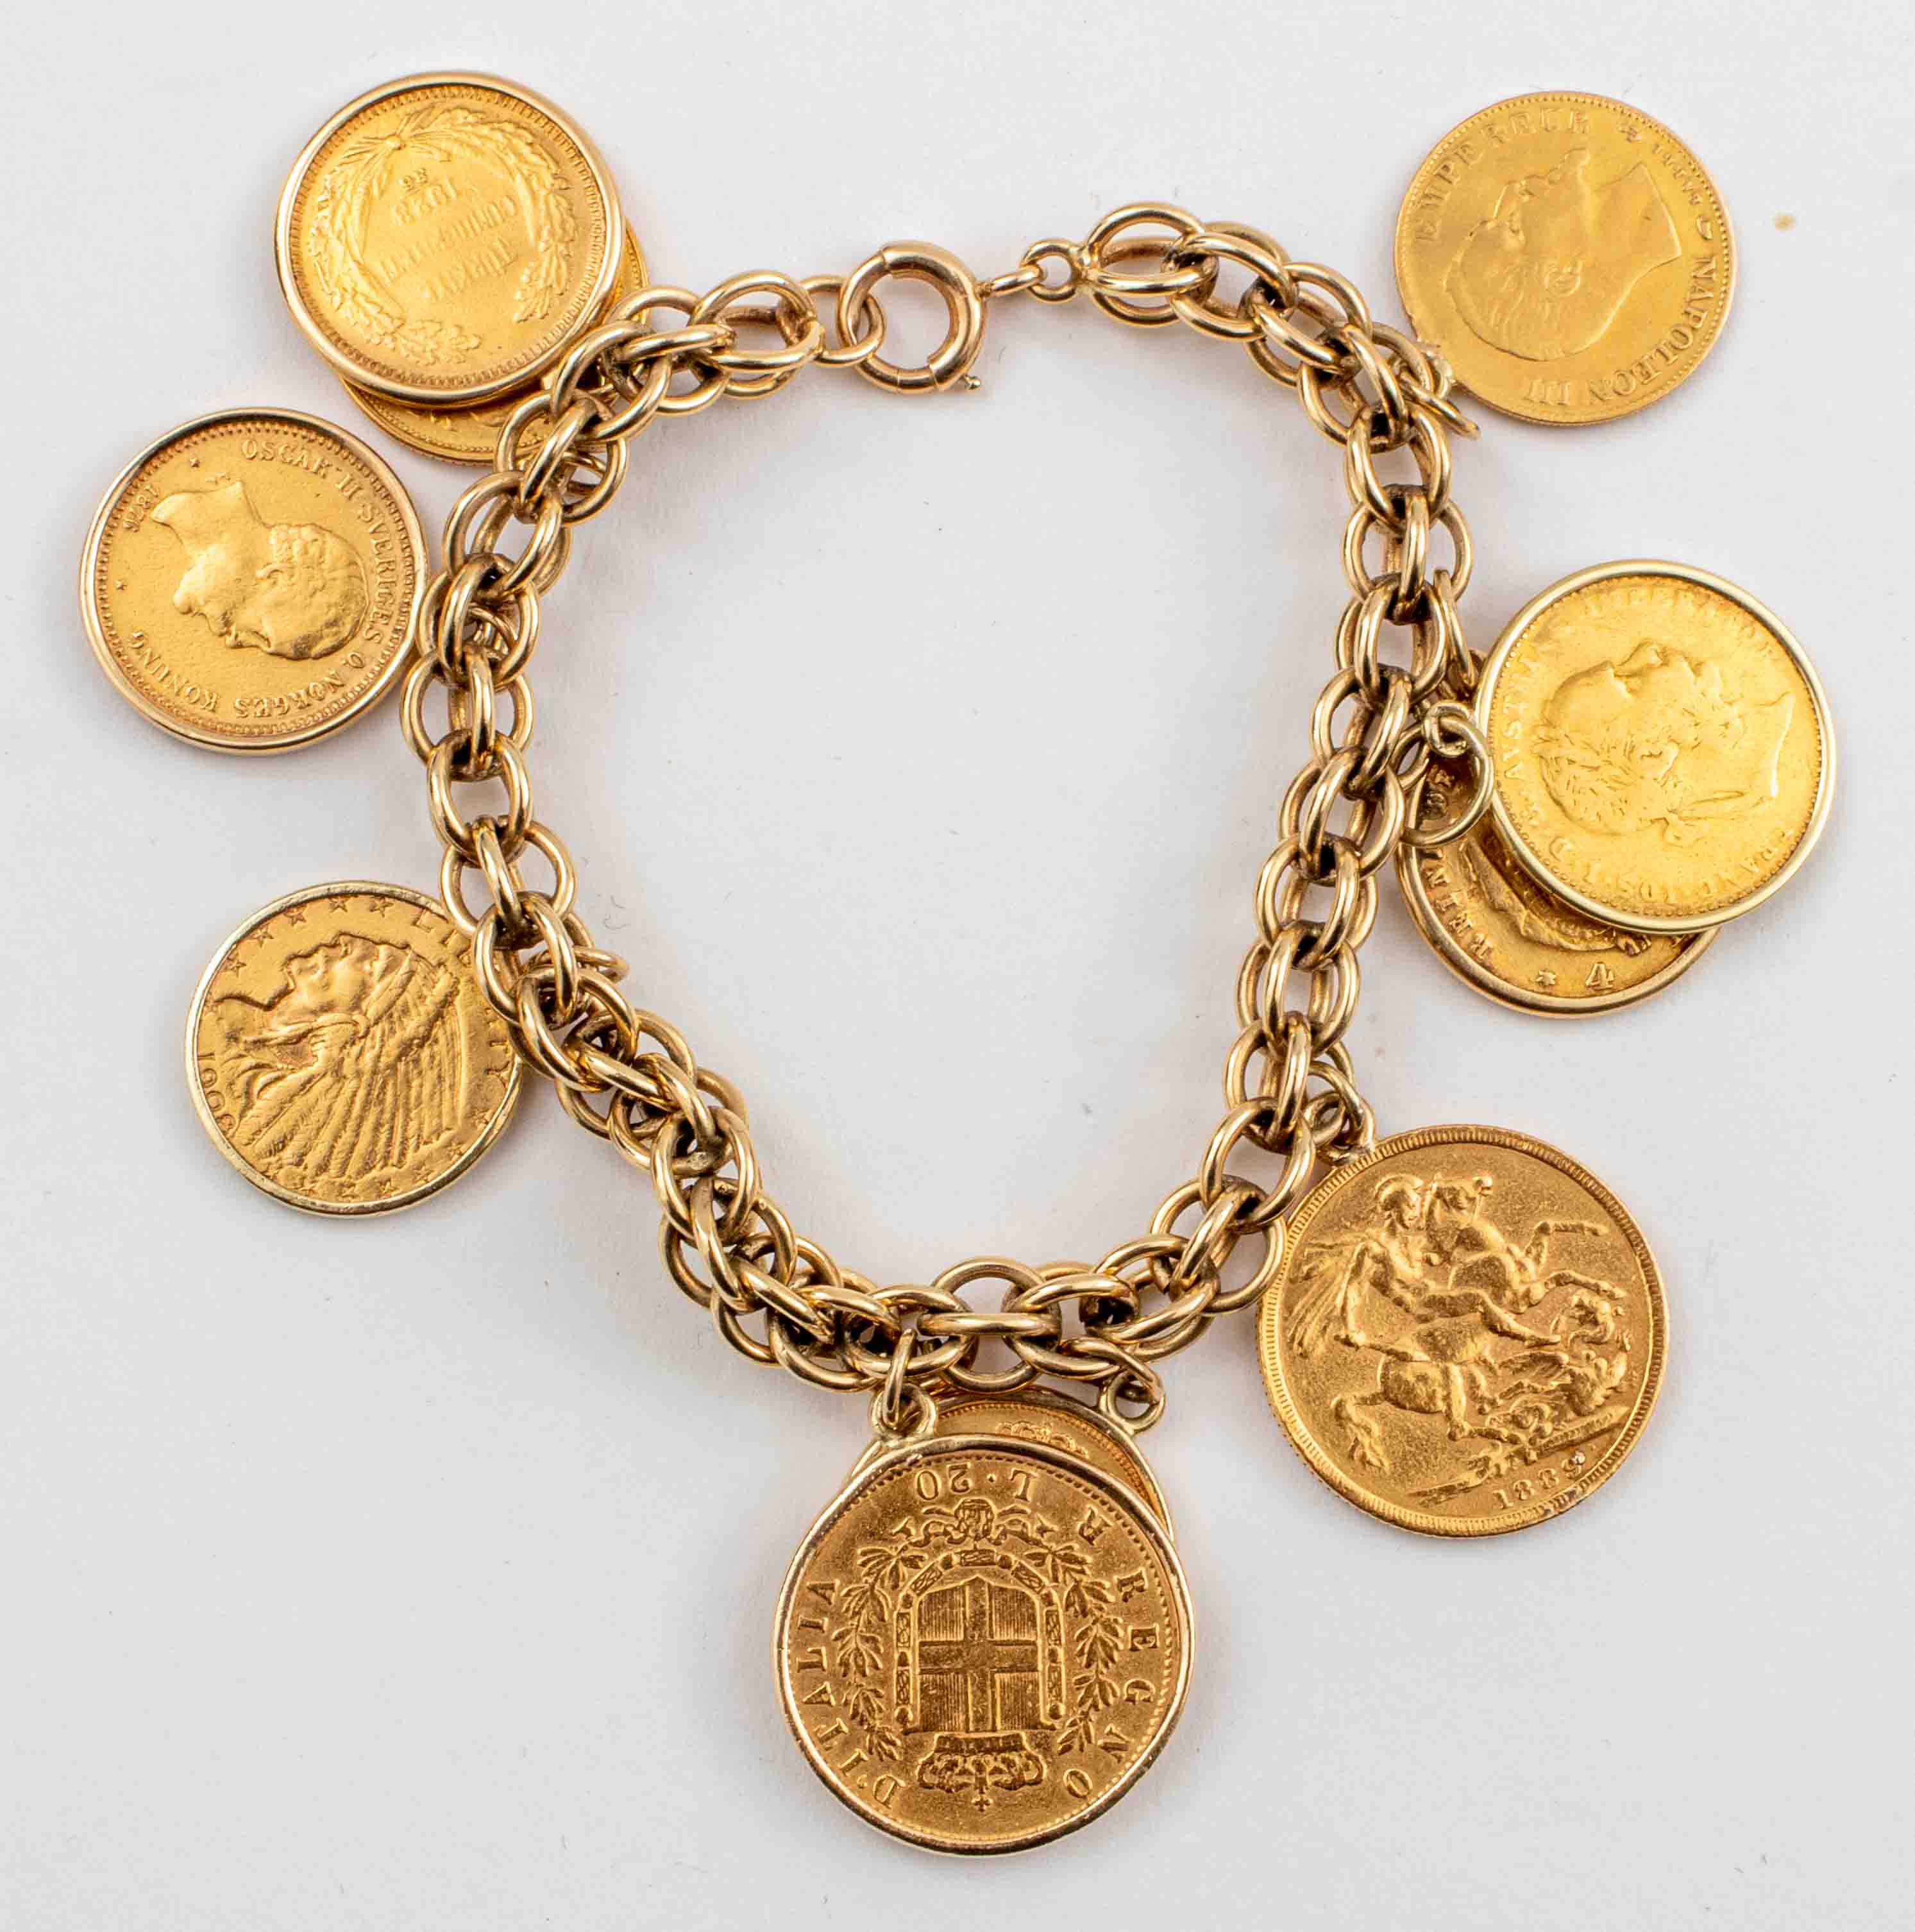 ANTIQUE 22K & 14K YELLOW GOLD COIN